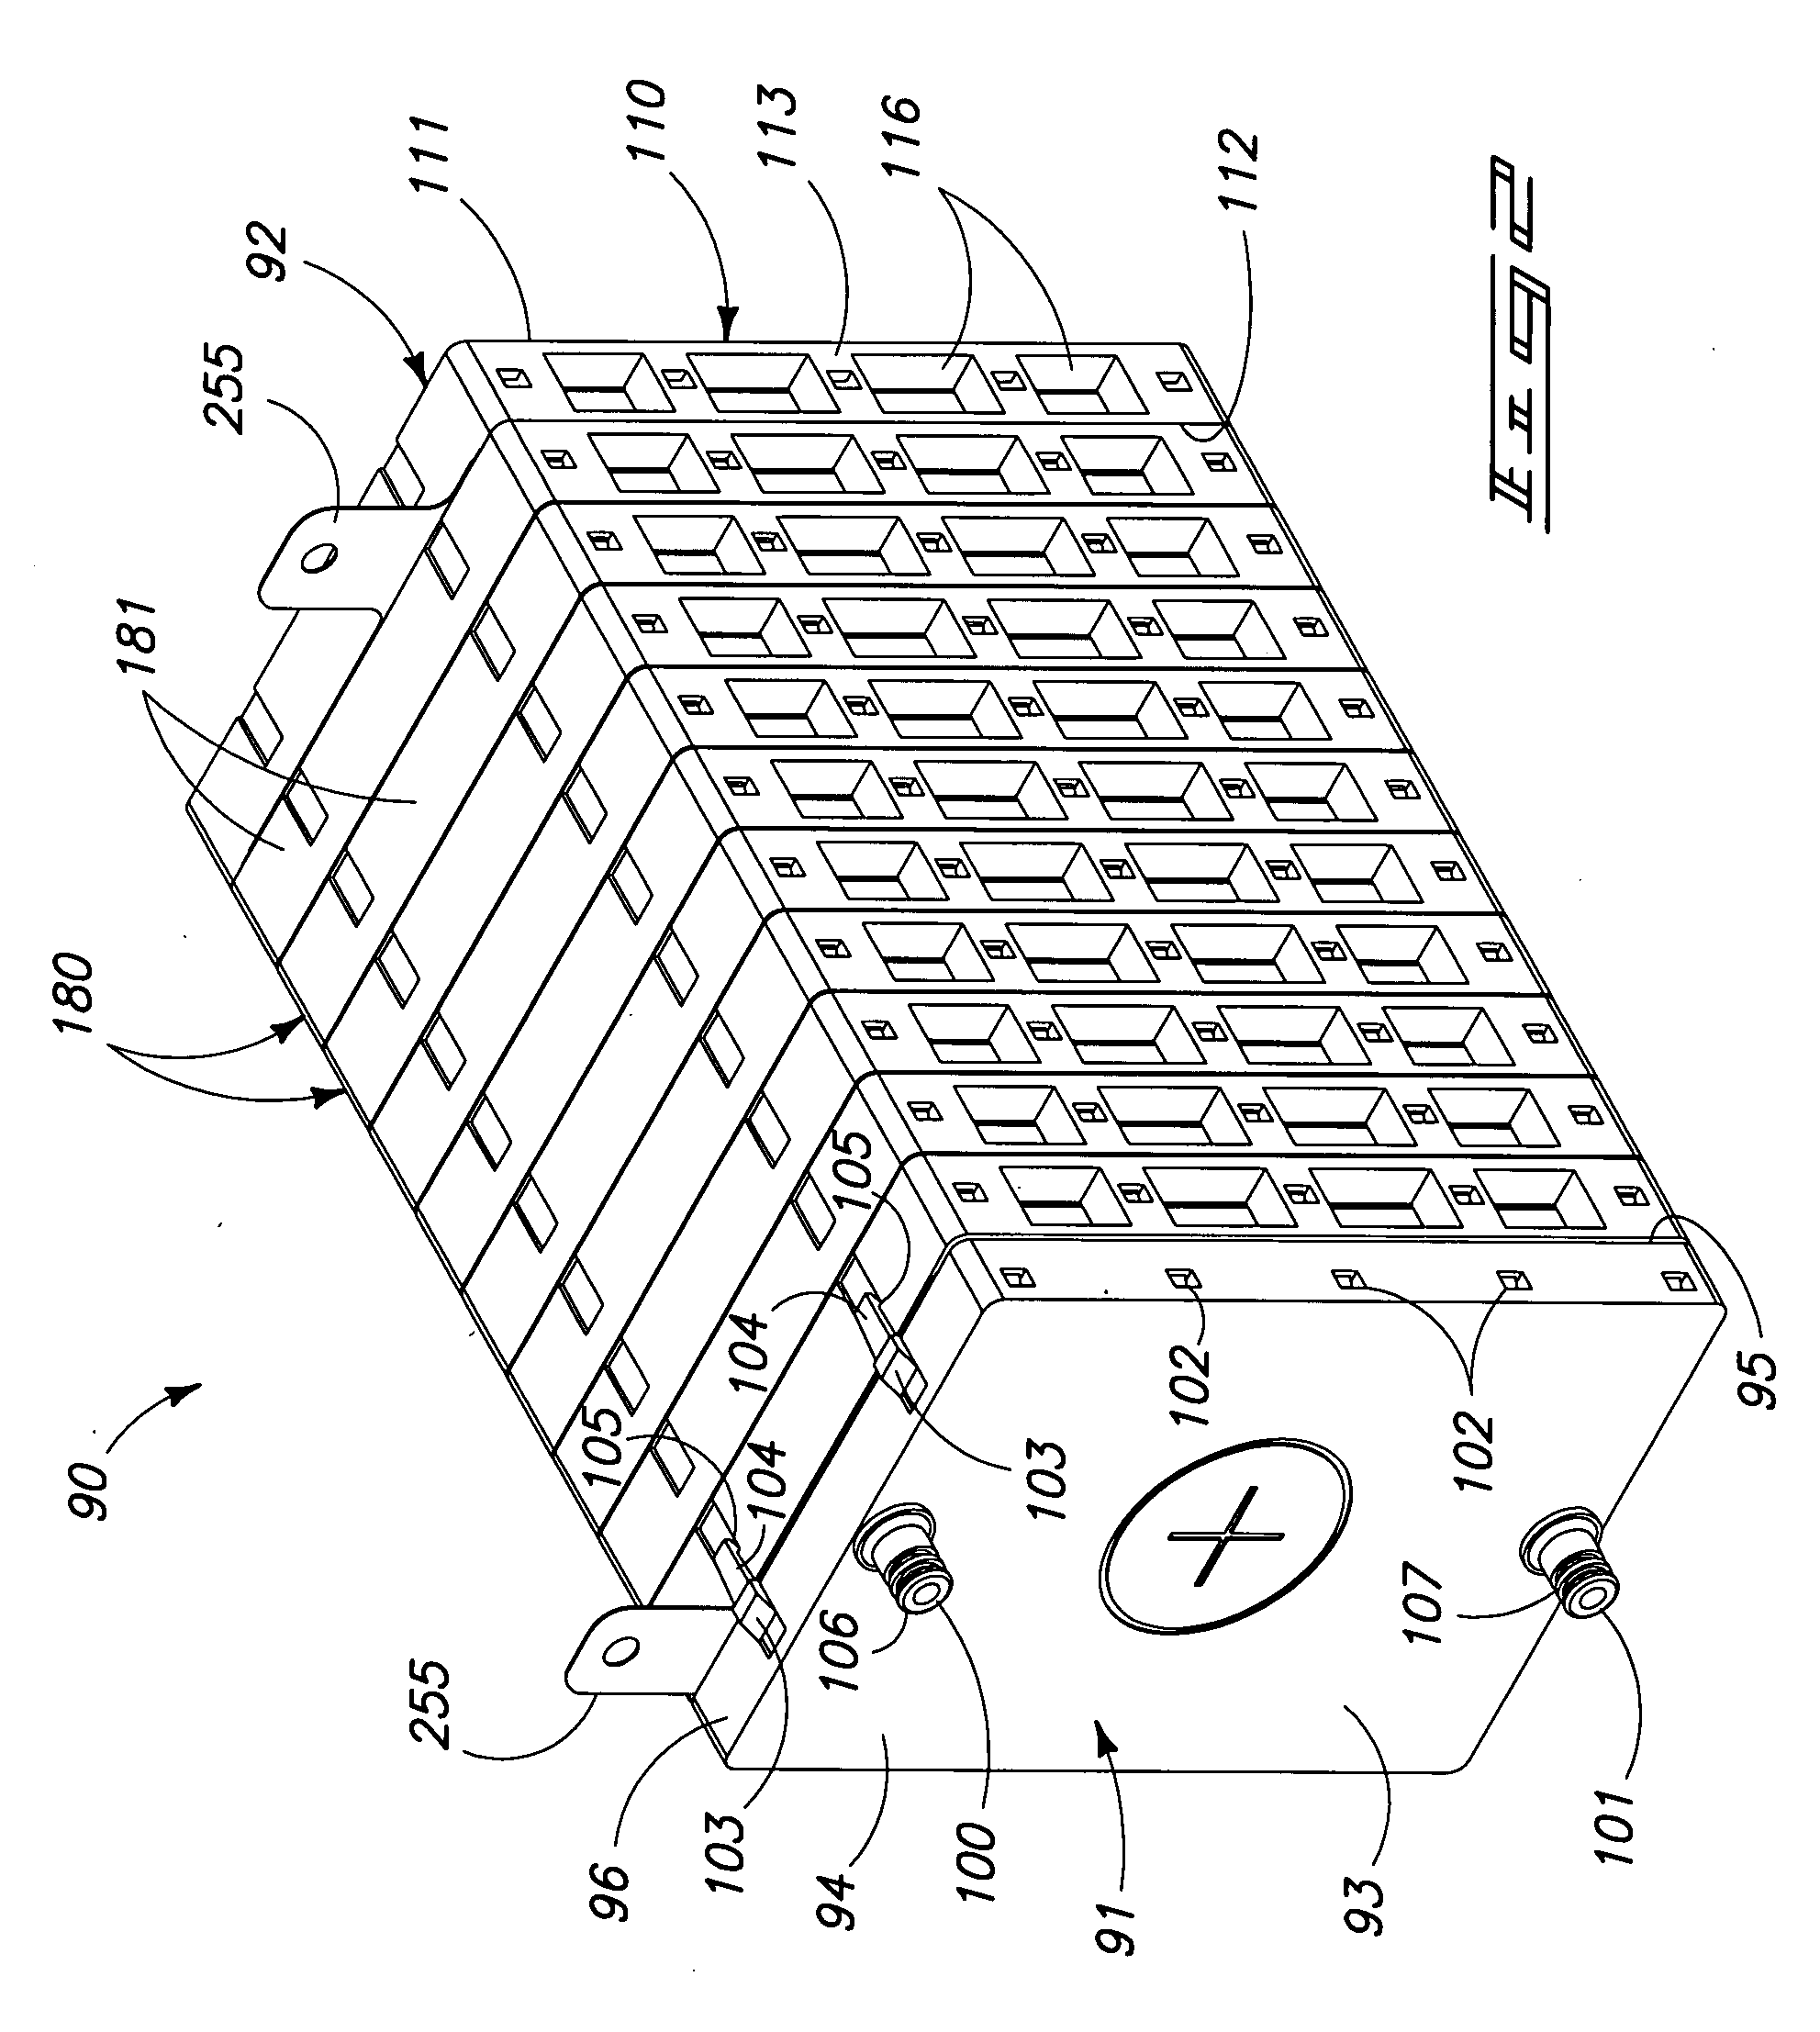 Proton exchange membrane fuel cell stack and fuel cell stack module